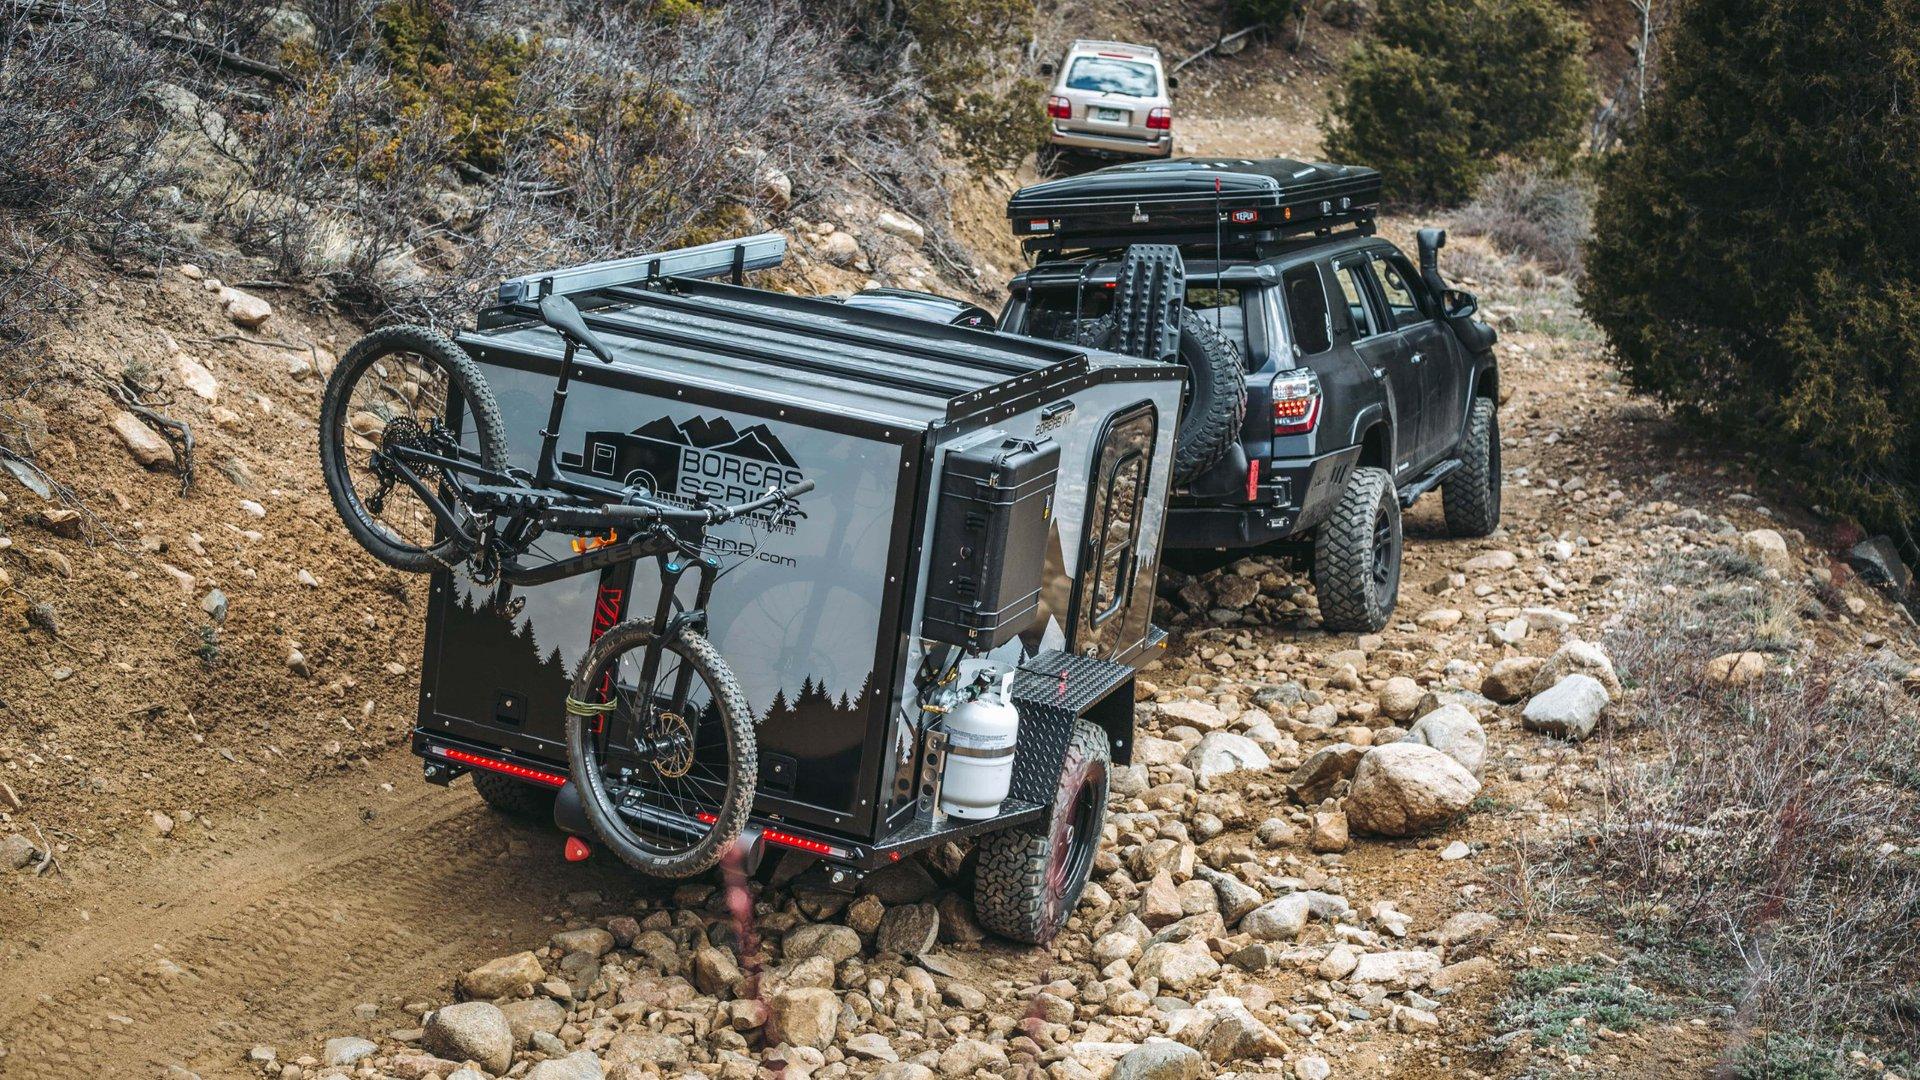 Boreas off-road camping trailer, one of the best off-road campers of 2022